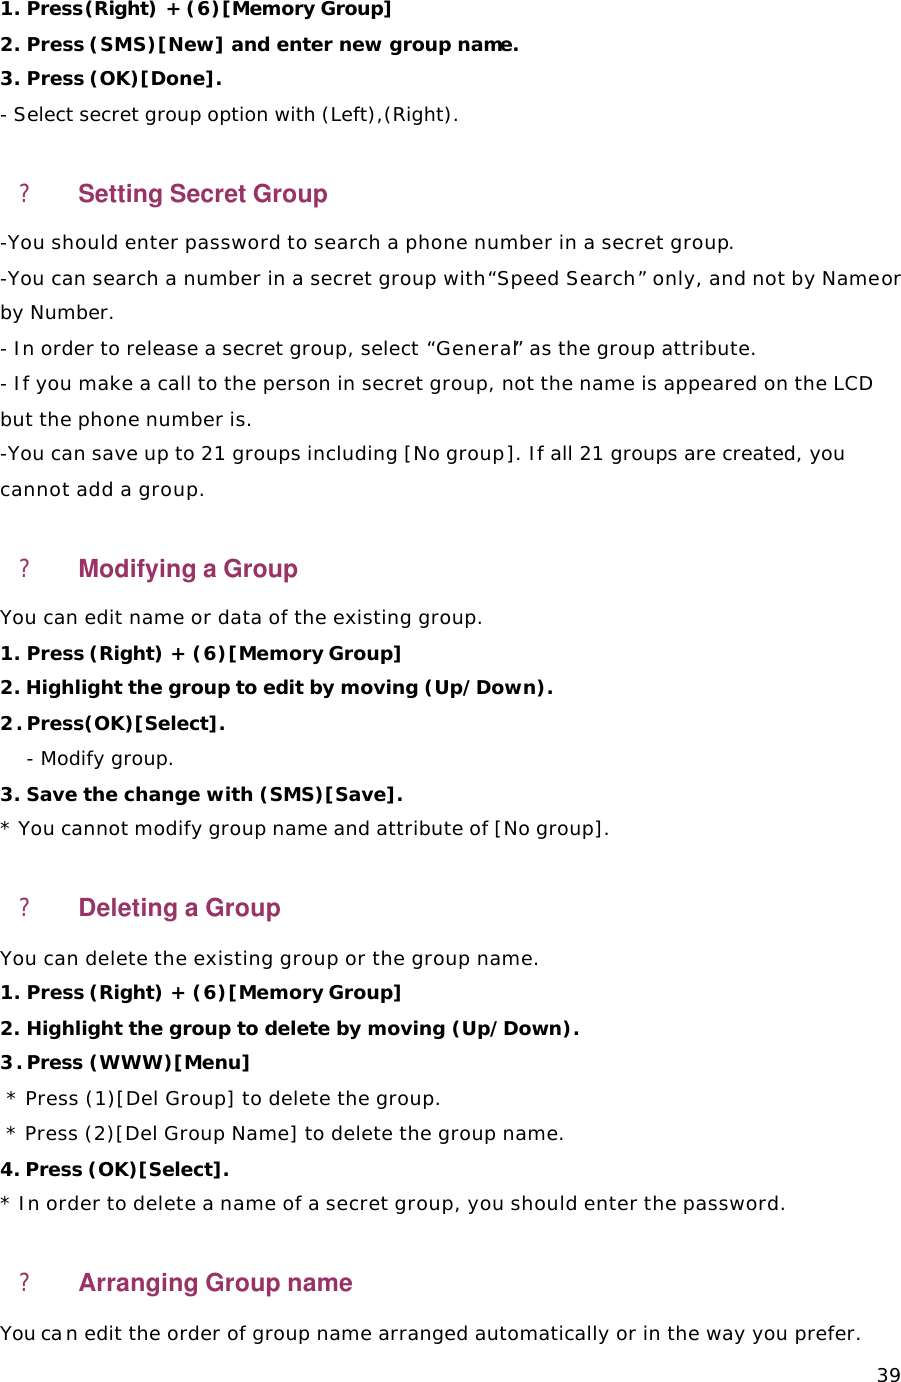   391. Press(Right) + (6)[Memory Group]   2. Press (SMS)[New] and enter new group name.      3. Press (OK)[Done]. - Select secret group option with (Left),(Right).  ? Setting Secret Group -You should enter password to search a phone number in a secret group.  -You can search a number in a secret group with “Speed Search” only, and not by Name or by Number. - In order to release a secret group, select “General” as the group attribute. - If you make a call to the person in secret group, not the name is appeared on the LCD but the phone number is.   -You can save up to 21 groups including [No group]. If all 21 groups are created, you cannot add a group.  ? Modifying a Group You can edit name or data of the existing group. 1. Press (Right) + (6)[Memory Group] 2. Highlight the group to edit by moving (Up/Down). 2. Press(OK)[Select].    - Modify group.  3. Save the change with (SMS)[Save]. * You cannot modify group name and attribute of [No group]. ? Deleting a Group   You can delete the existing group or the group name.  1. Press (Right) + (6)[Memory Group] 2. Highlight the group to delete by moving (Up/Down). 3. Press (WWW)[Menu]   * Press (1)[Del Group] to delete the group.  * Press (2)[Del Group Name] to delete the group name.  4. Press (OK)[Select].   * In order to delete a name of a secret group, you should enter the password. ? Arranging Group name You can edit the order of group name arranged automatically or in the way you prefer.  